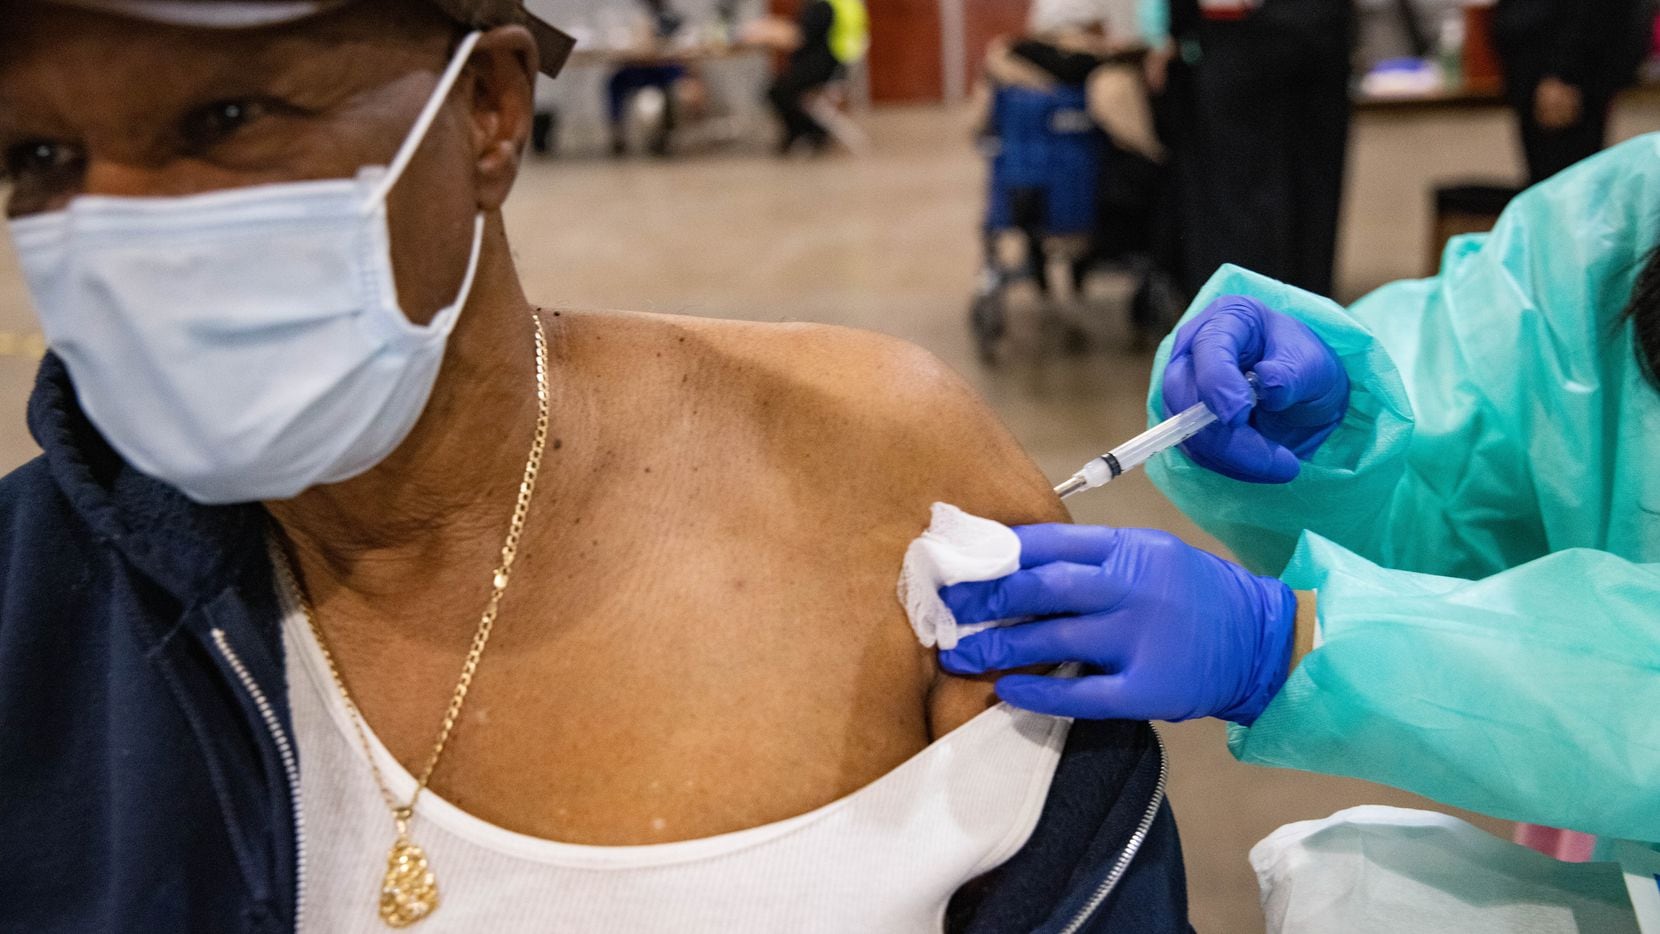 Verely Cooper, 81, of DeSoto looks away as he receives the COVID-19 vaccine at Fair Park in...